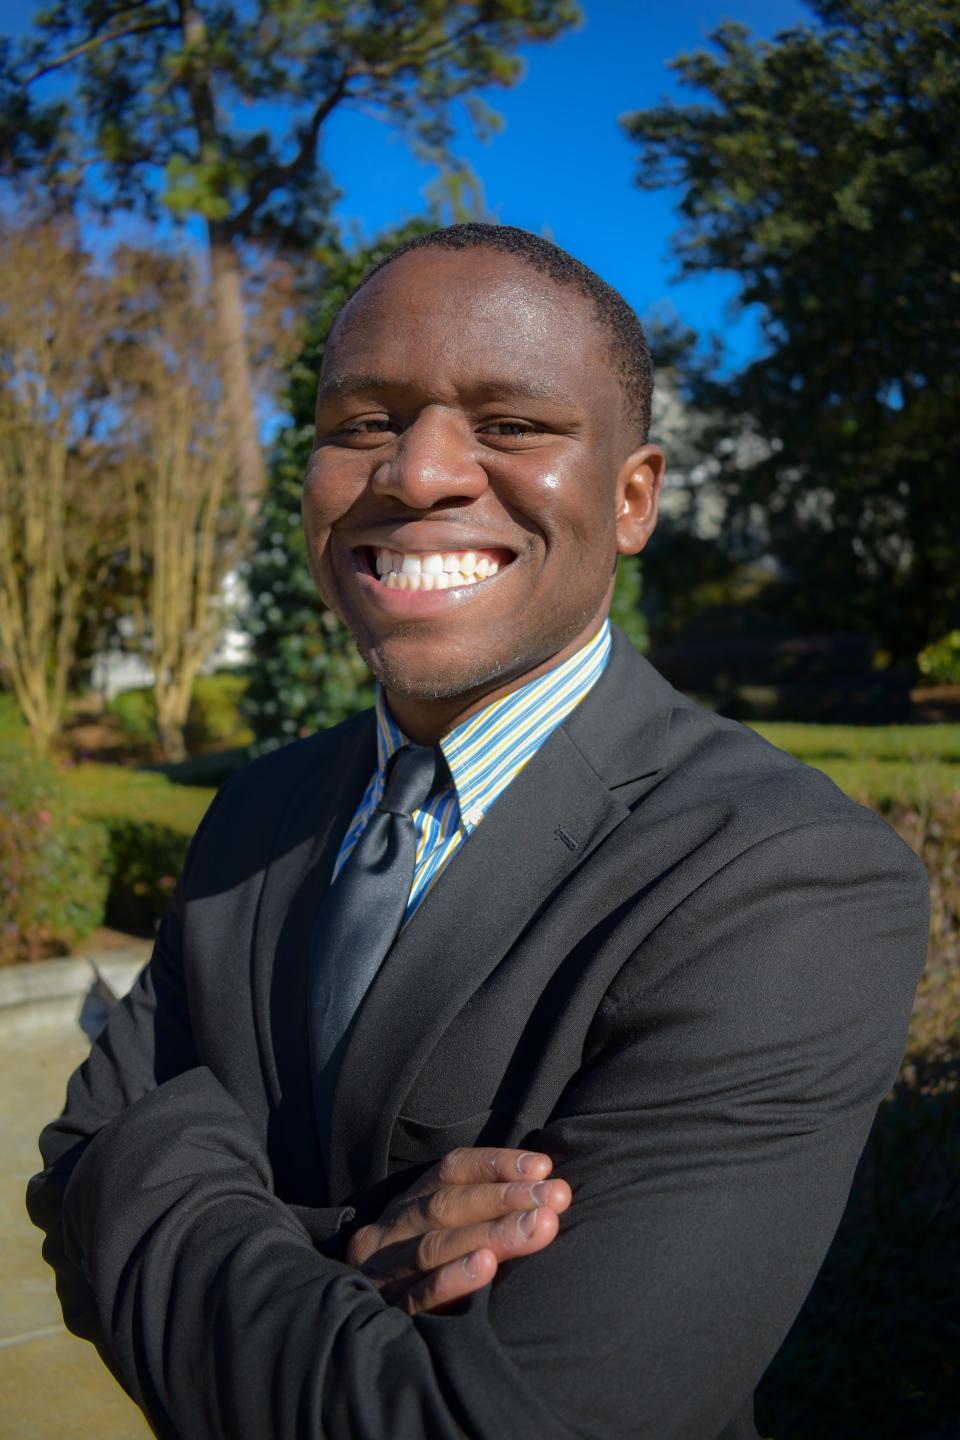 Victor Agbafe is an MD/JD student at the University of Michigan Medical School and Yale Law School, where he is a research fellow at the Solomon Center for Health Law and Policy.